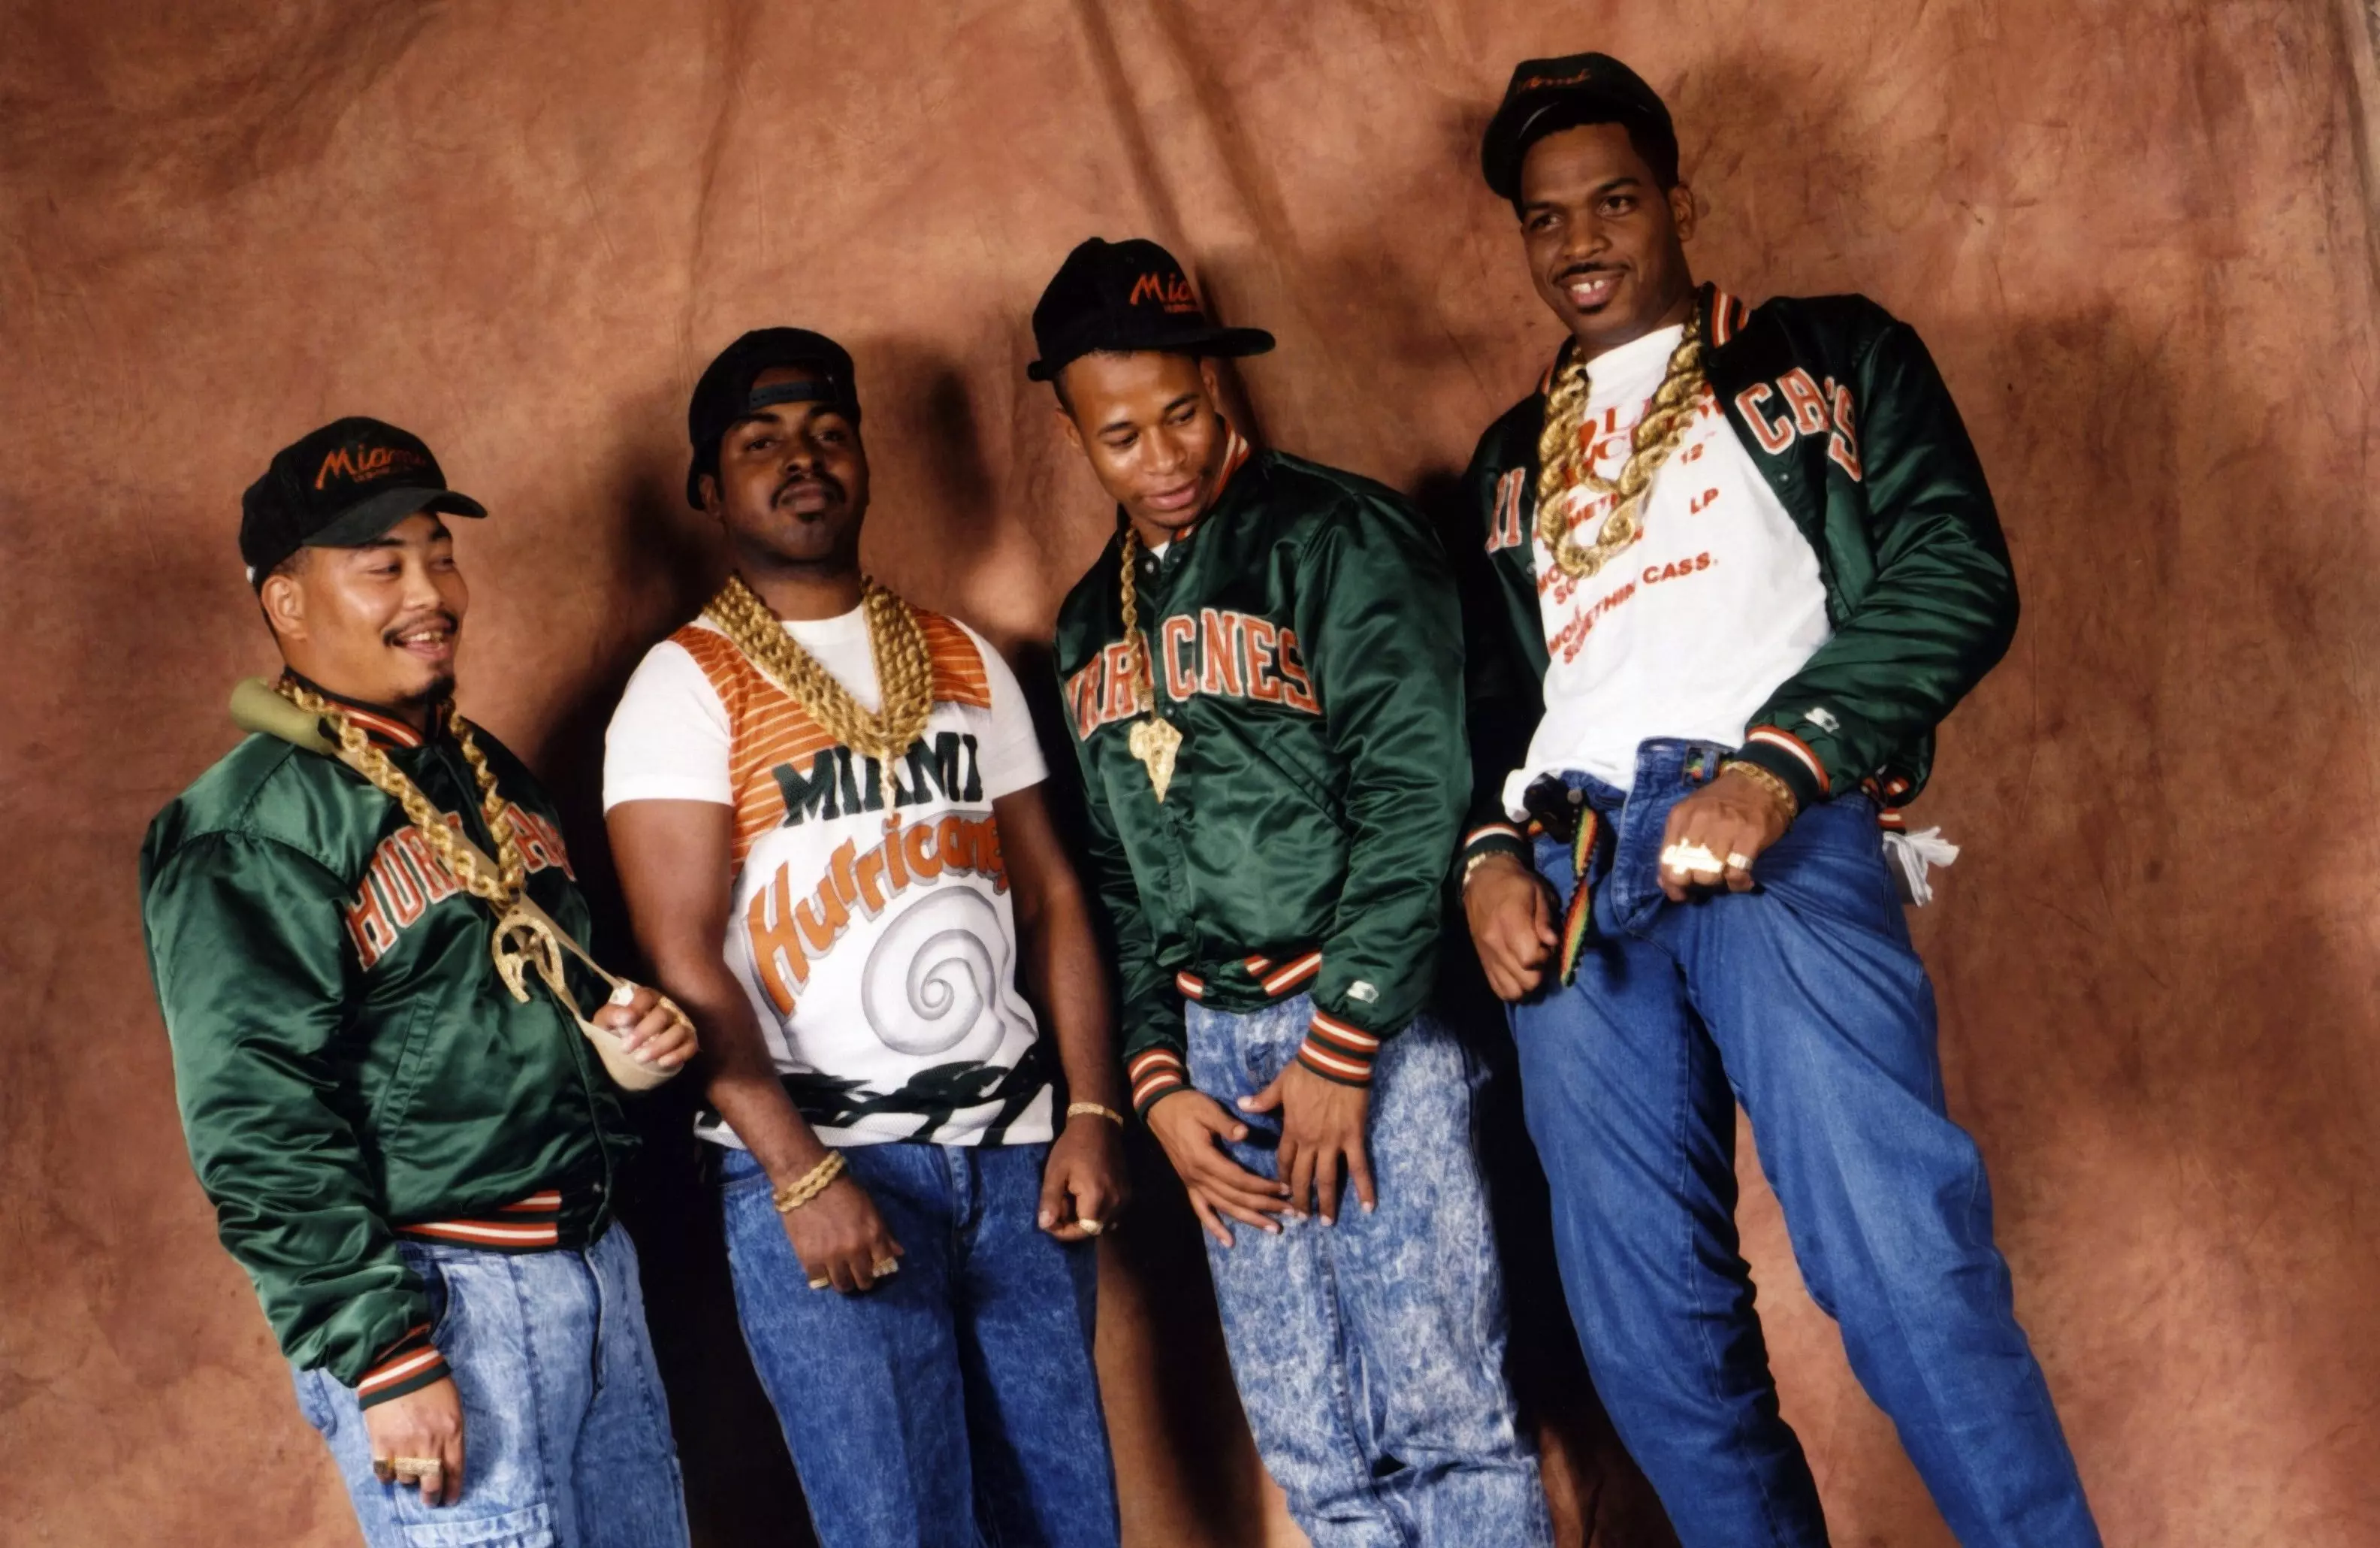 On This Day In Music: 2 Live Crew's 'As Nasty As They Wanna Be' Becomes First Album Declared Legally Obscene, Anticipates First Amendment Cases